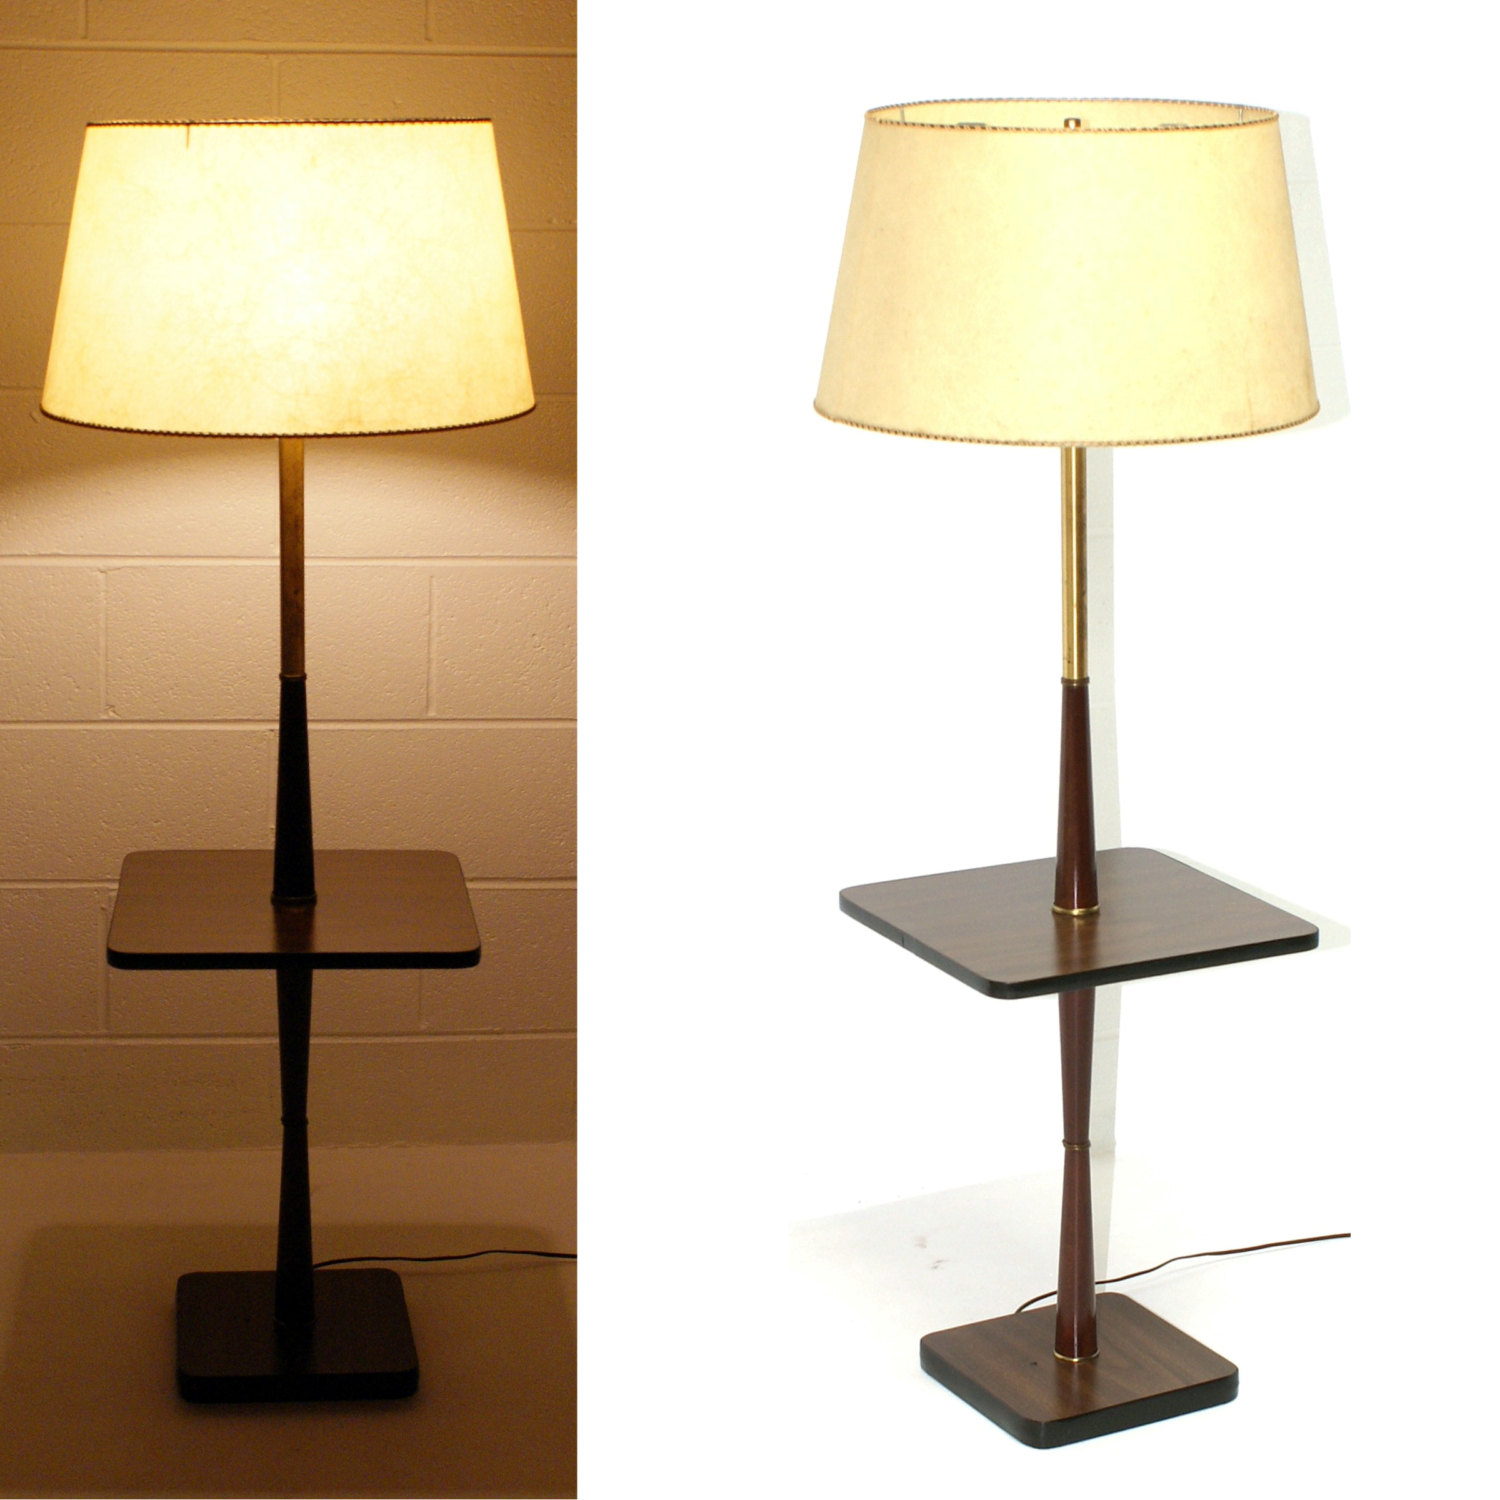 Floor Lamp With Table Attached, Floor Lamp With Table Attached Australia